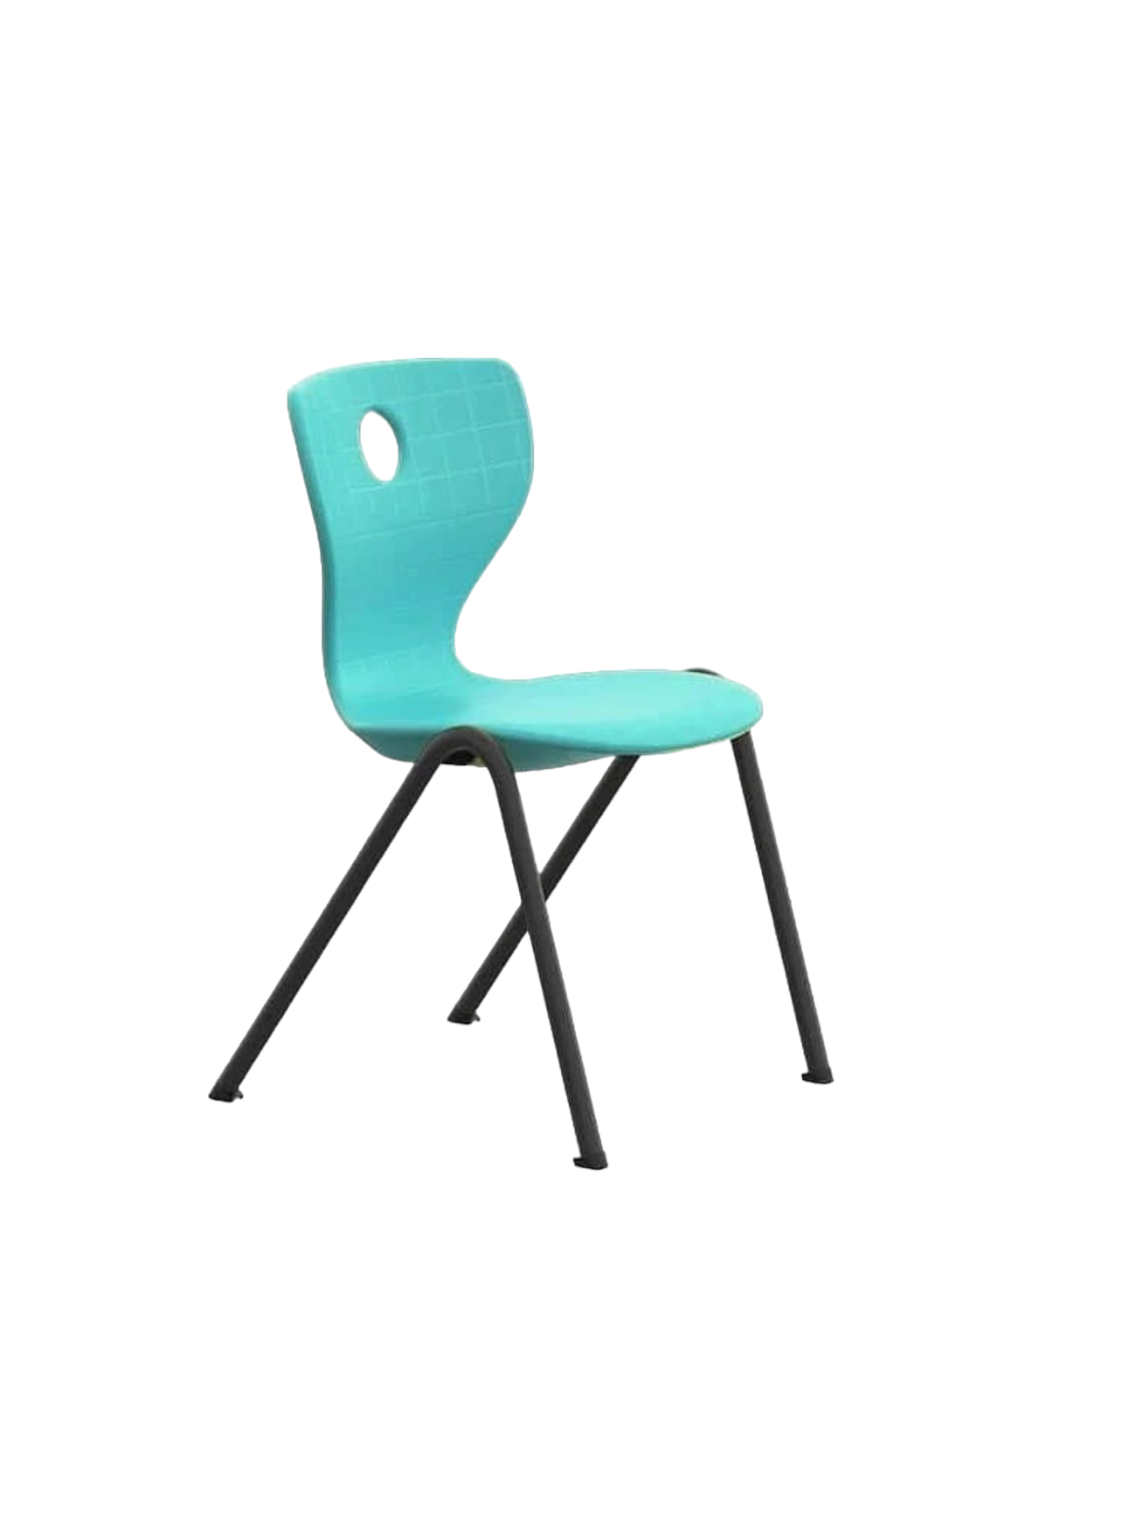 School Chairs Turquoise